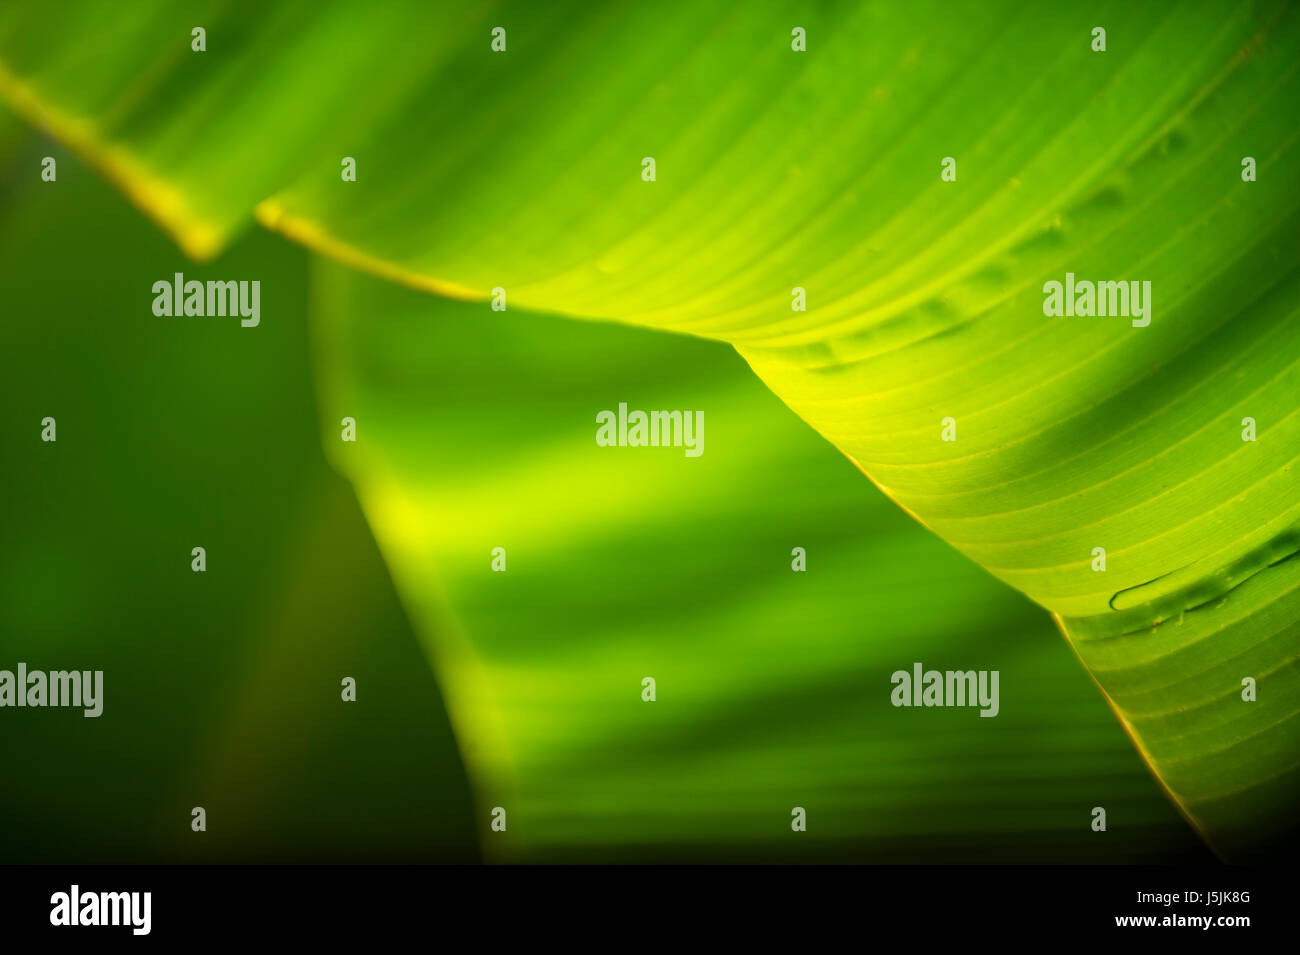 Shadow patterns in the tropical sunlight falling on the curving green leaf of a banana palm with natural texture in a close-up abstract background Stock Photo